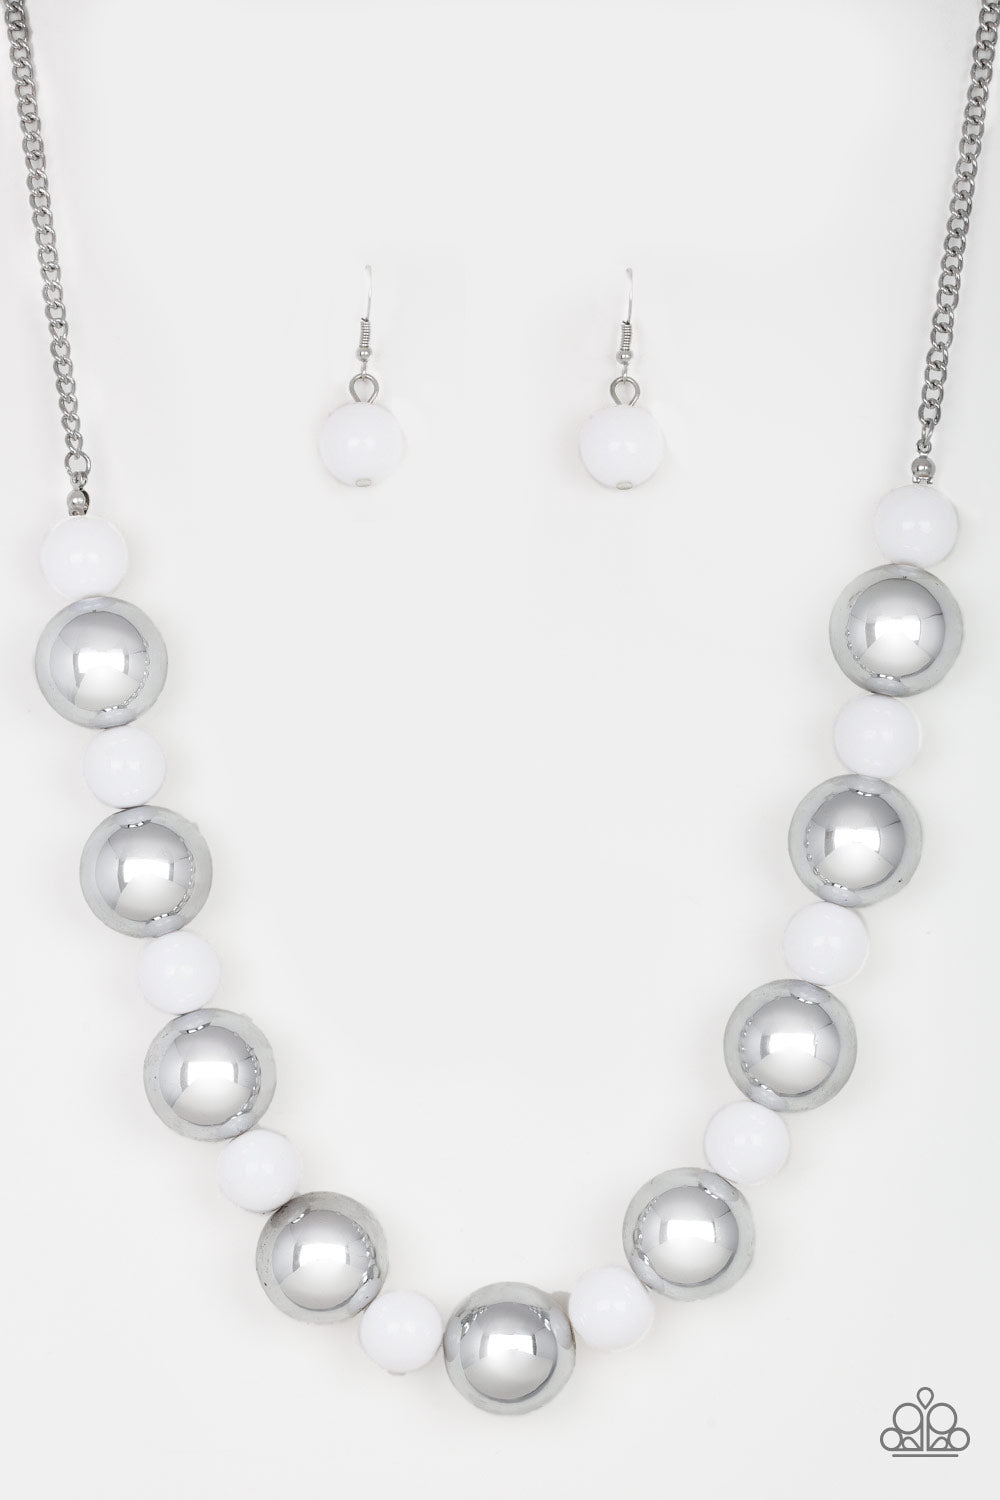 Top Pop - White necklace